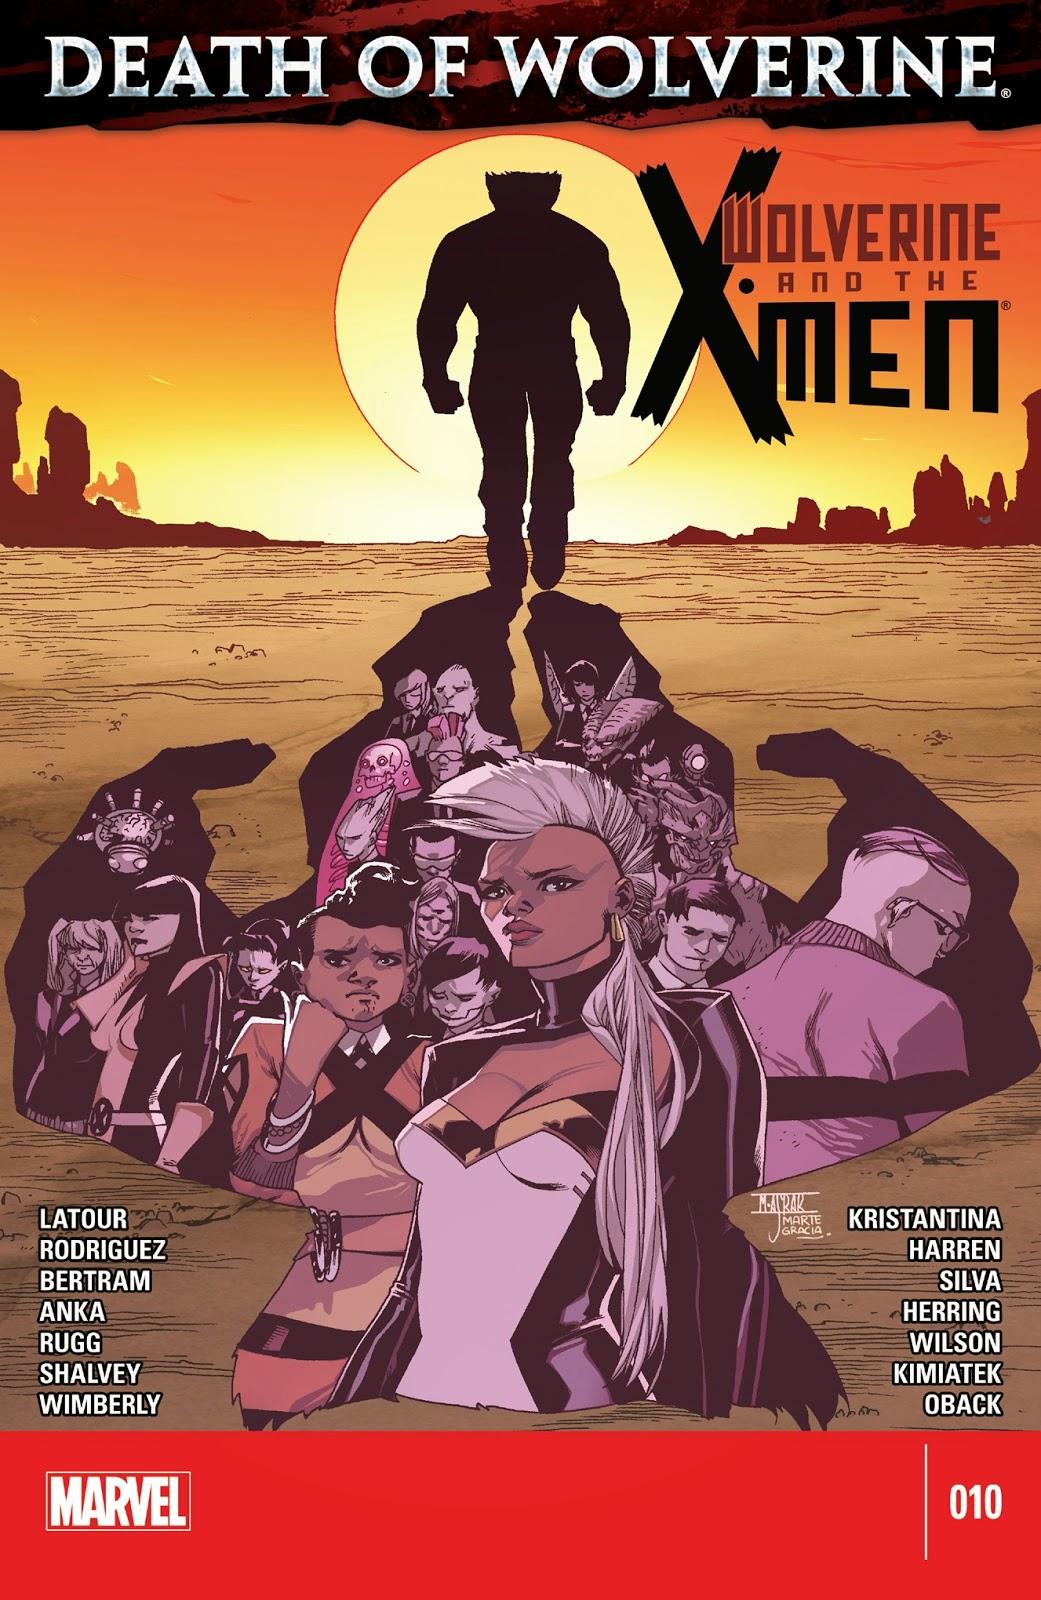 Wolverine and the X-Men Vol. 2 #10